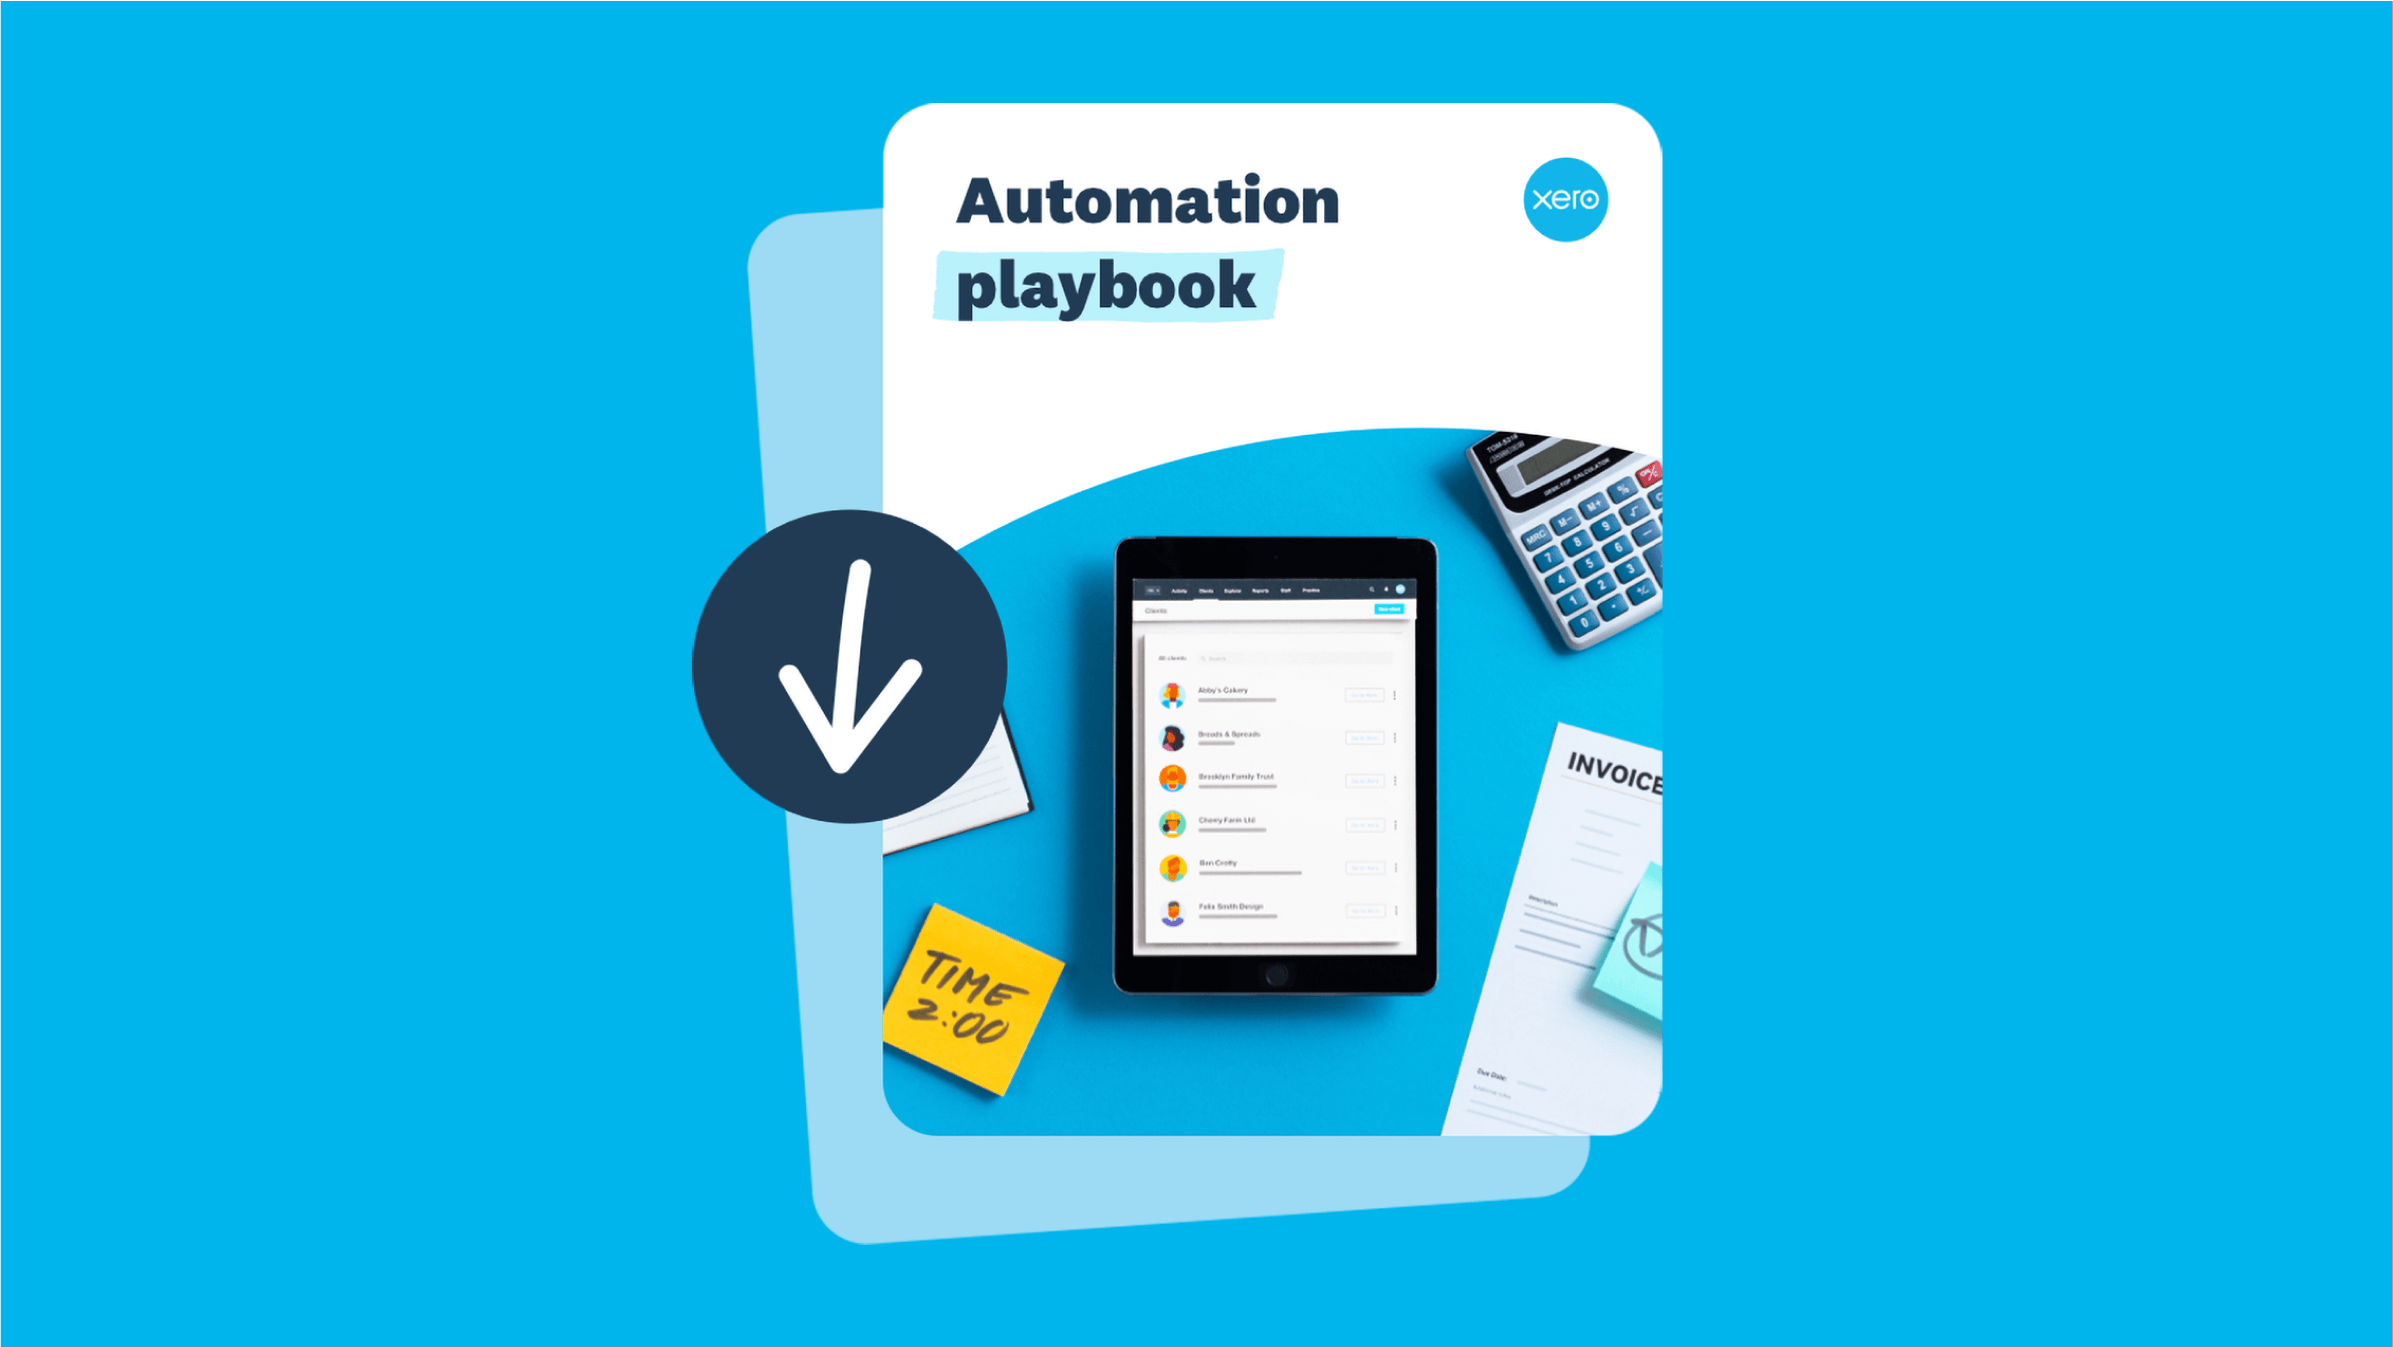 Xero’s automation playbook shows you how to build your practice, not your workload, when you automate tasks.